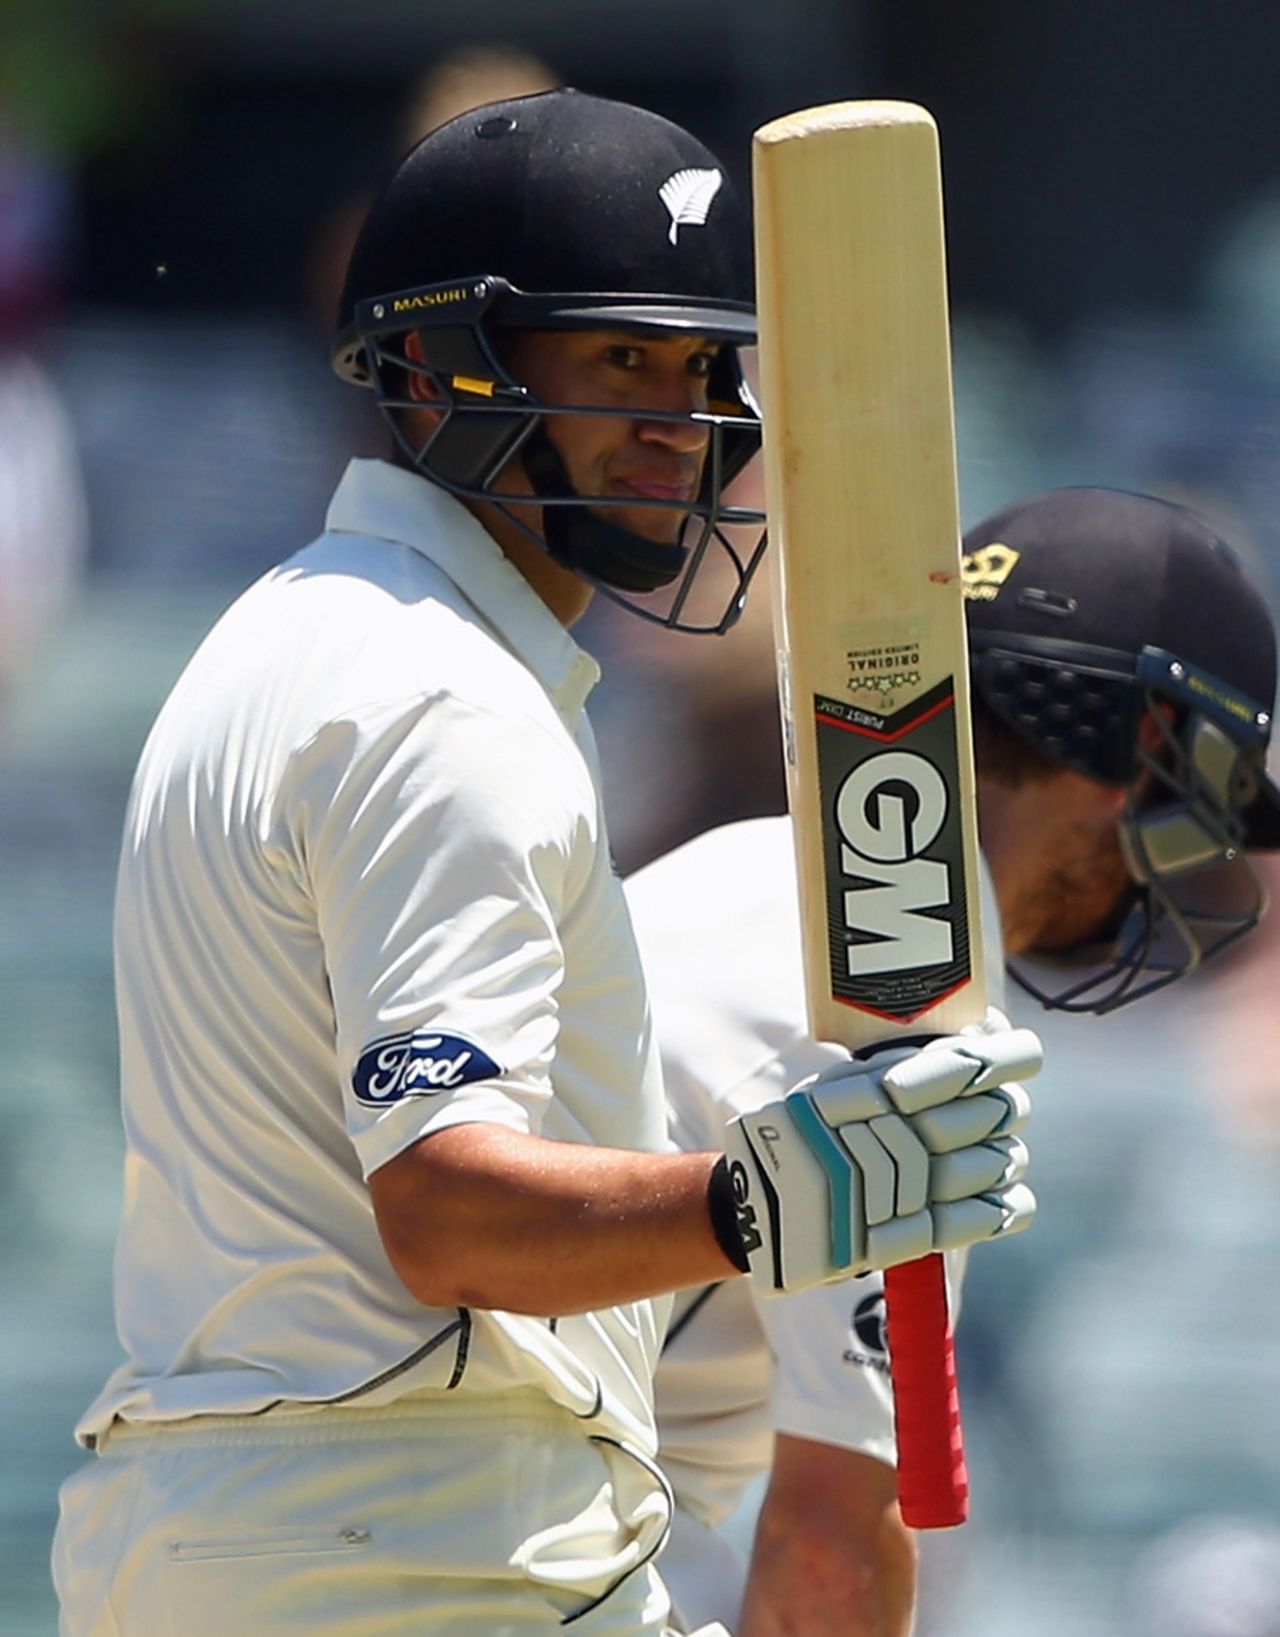 Ross Taylor acknowledges the applause after reaching his fifty, Australia v New Zealand, 2nd Test, Perth, 3rd day, November 15, 2015